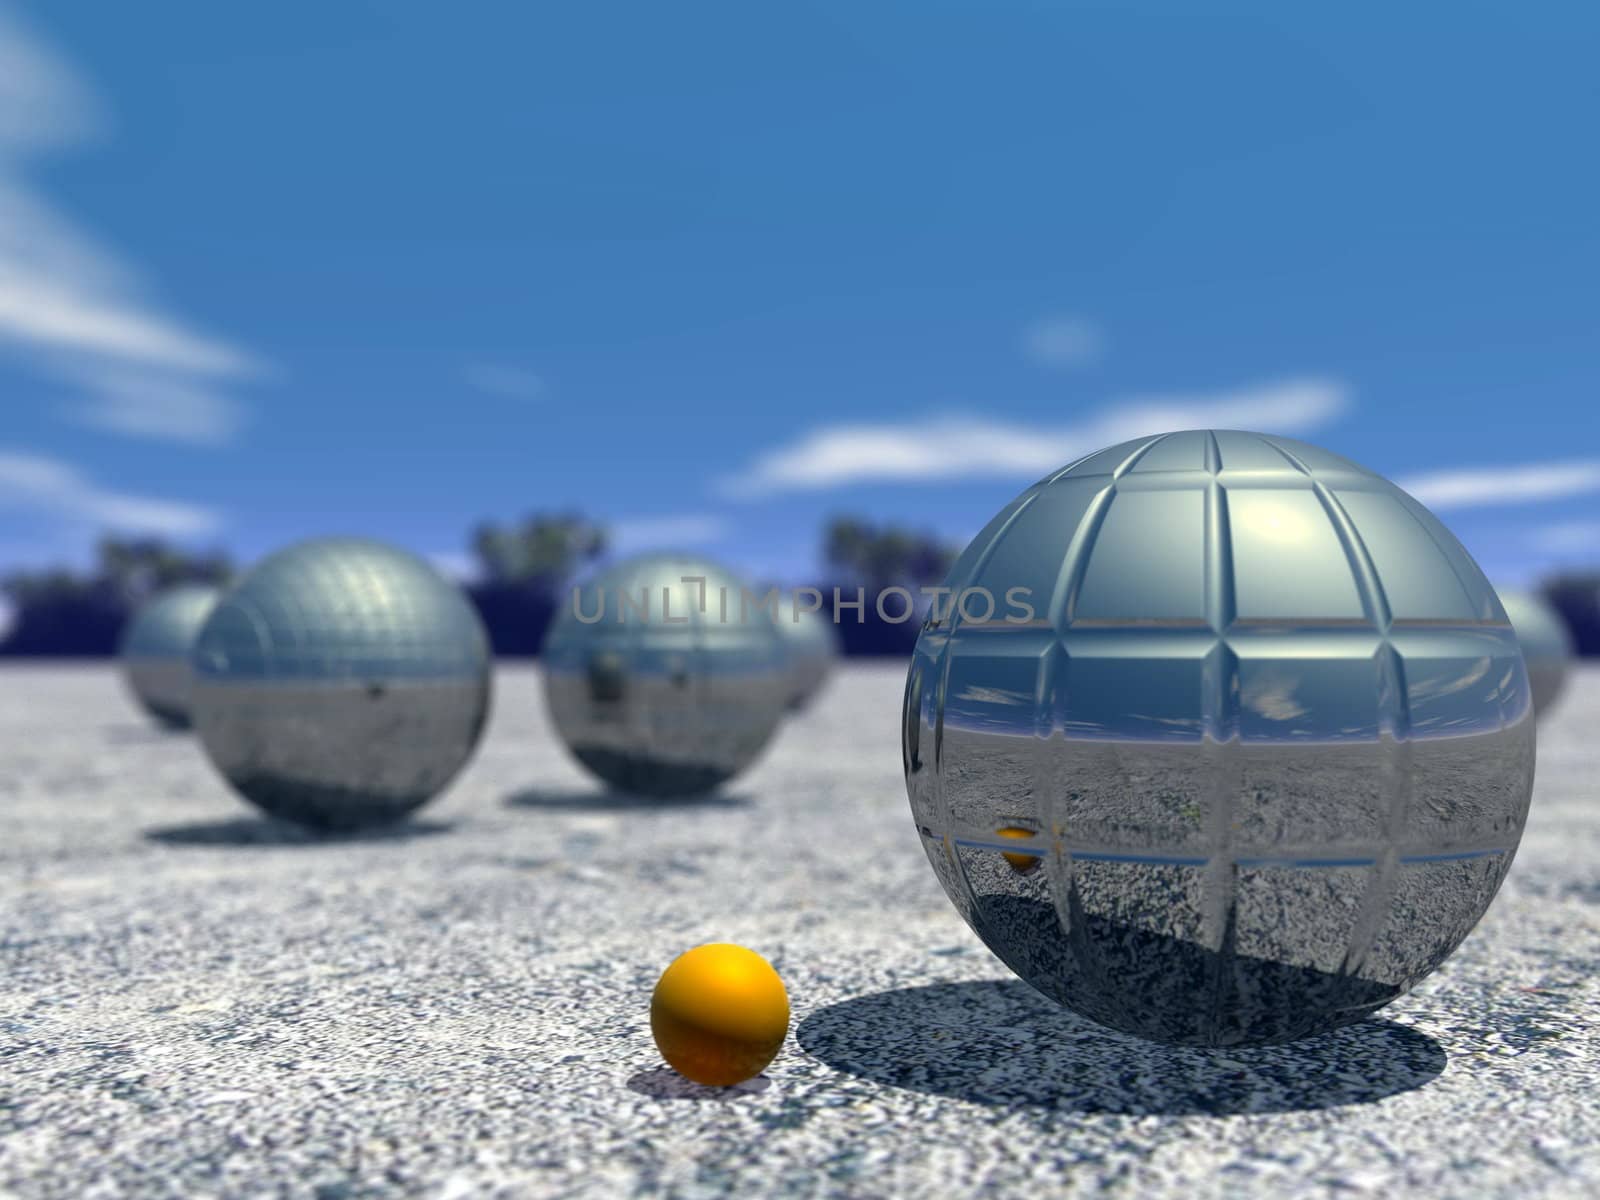 Petanque balls outdoor by beautiful day